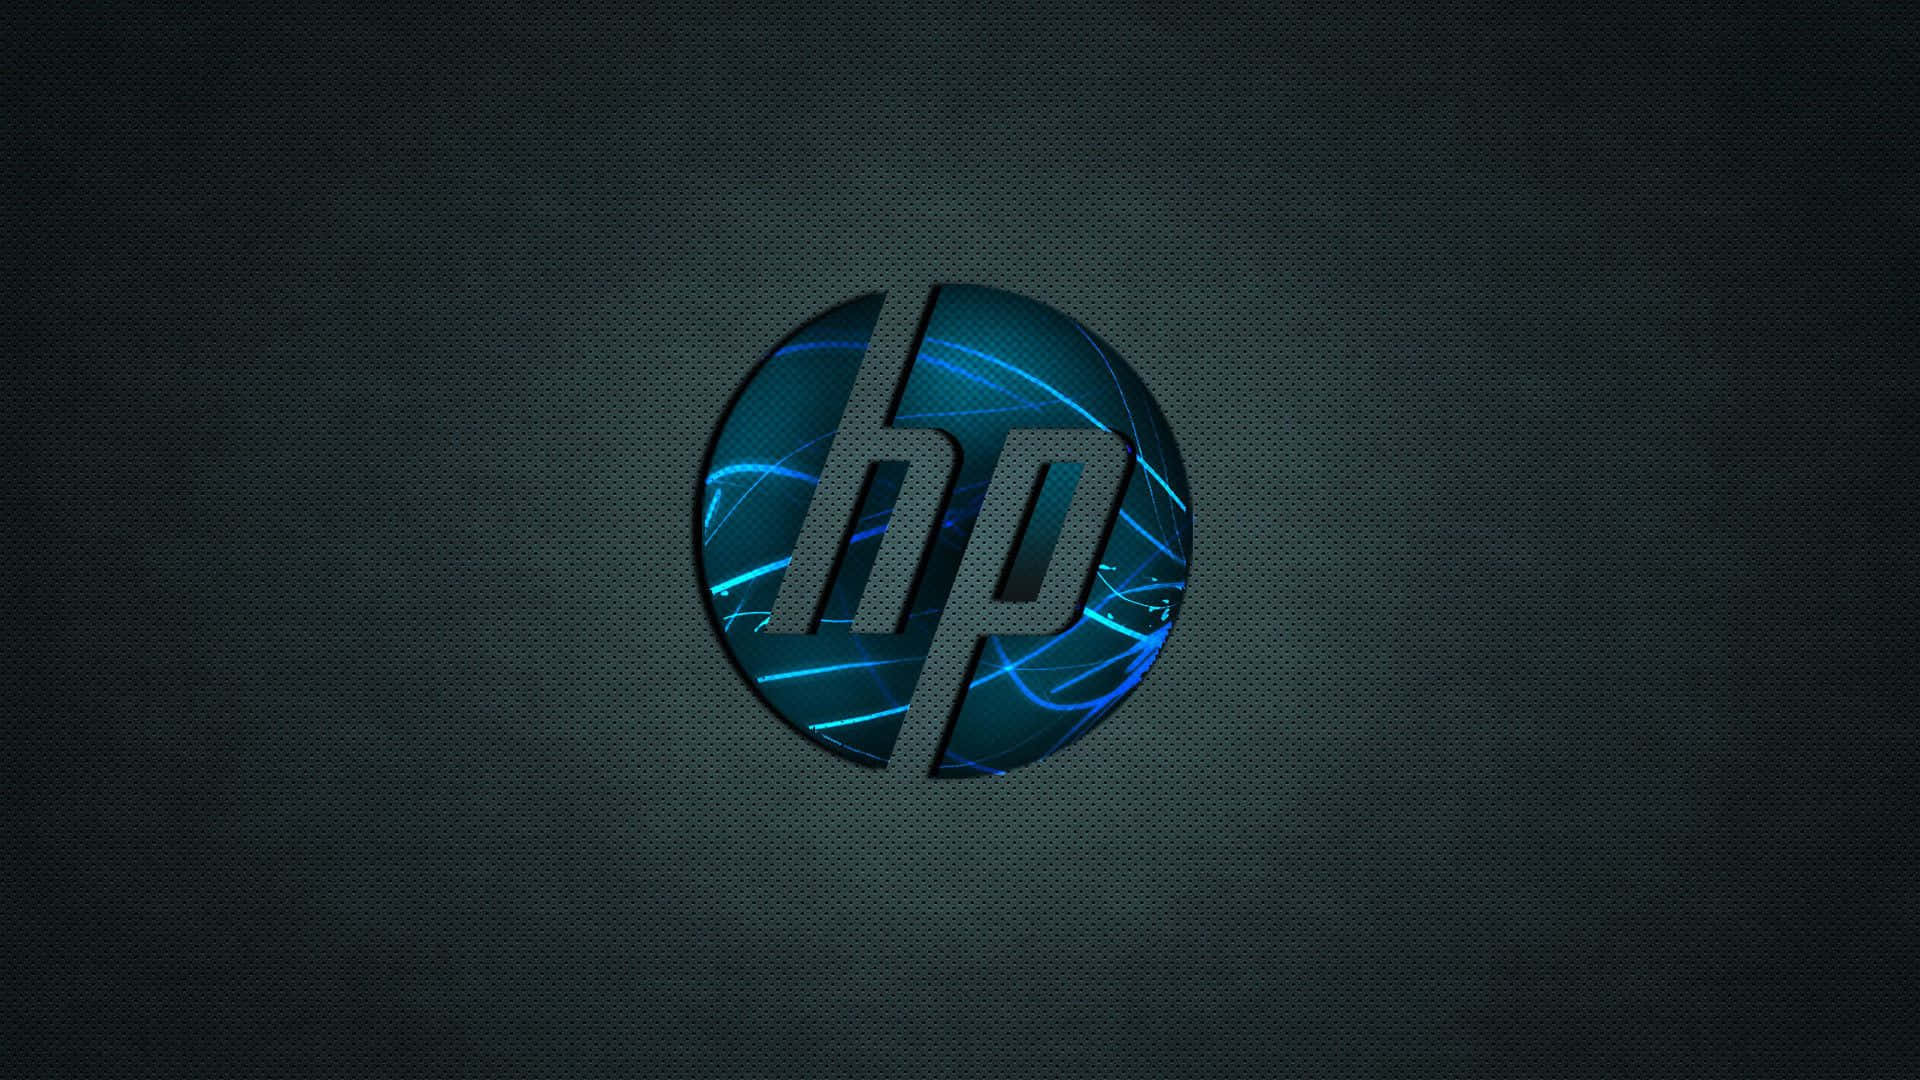 Unleash your creativity and optimize your ideas with HP